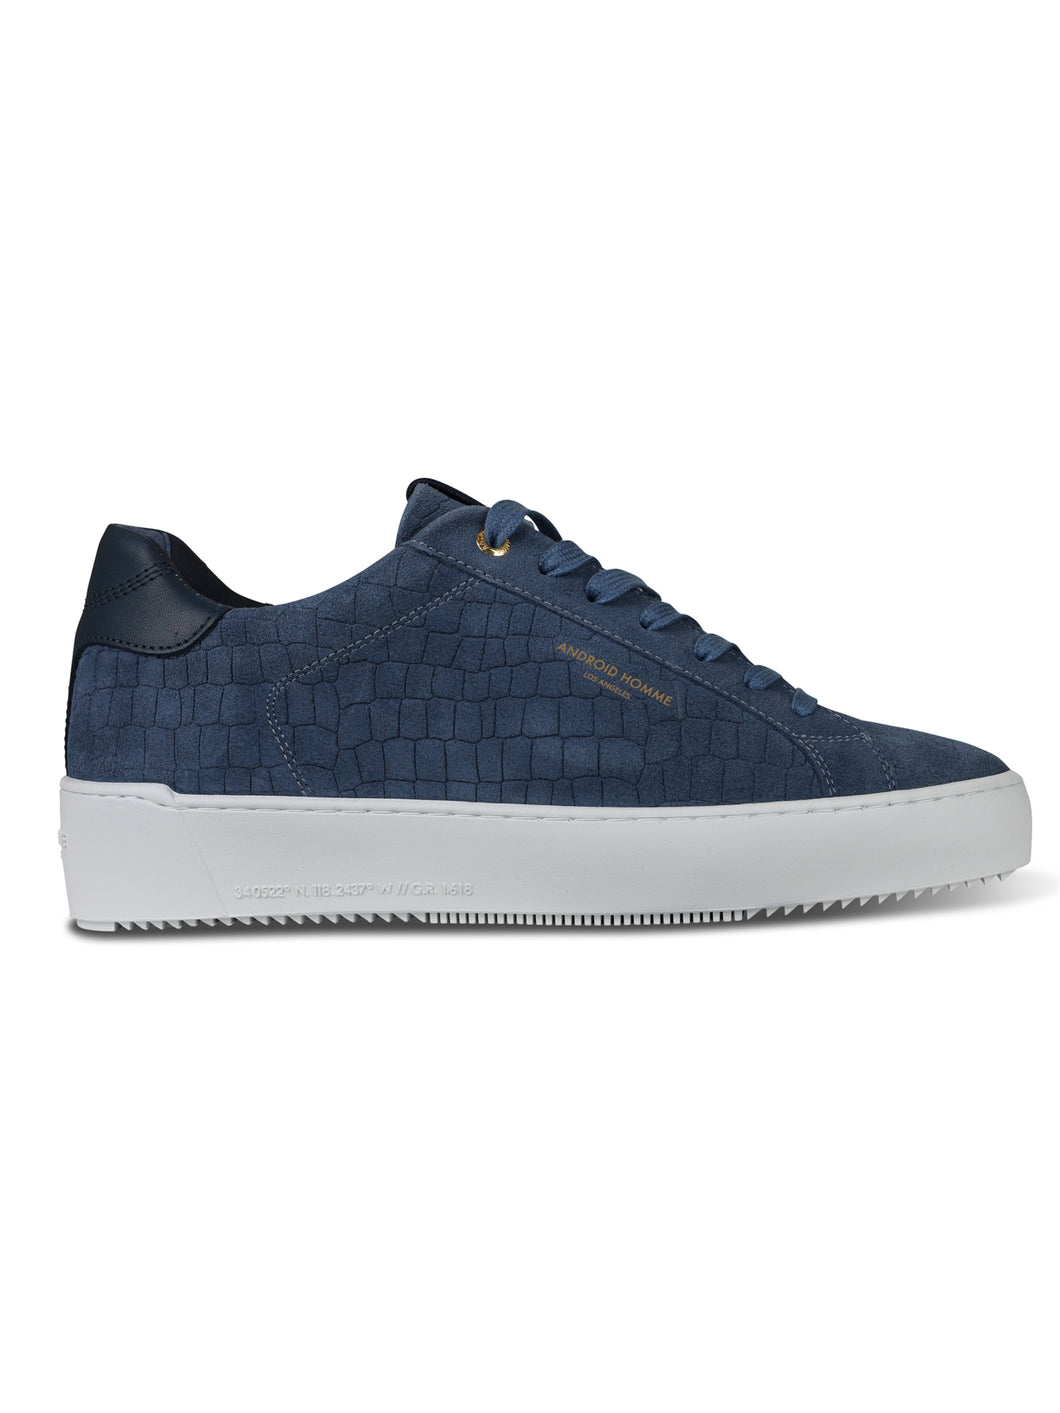 Android Homme Zuma Suede Croc Blue